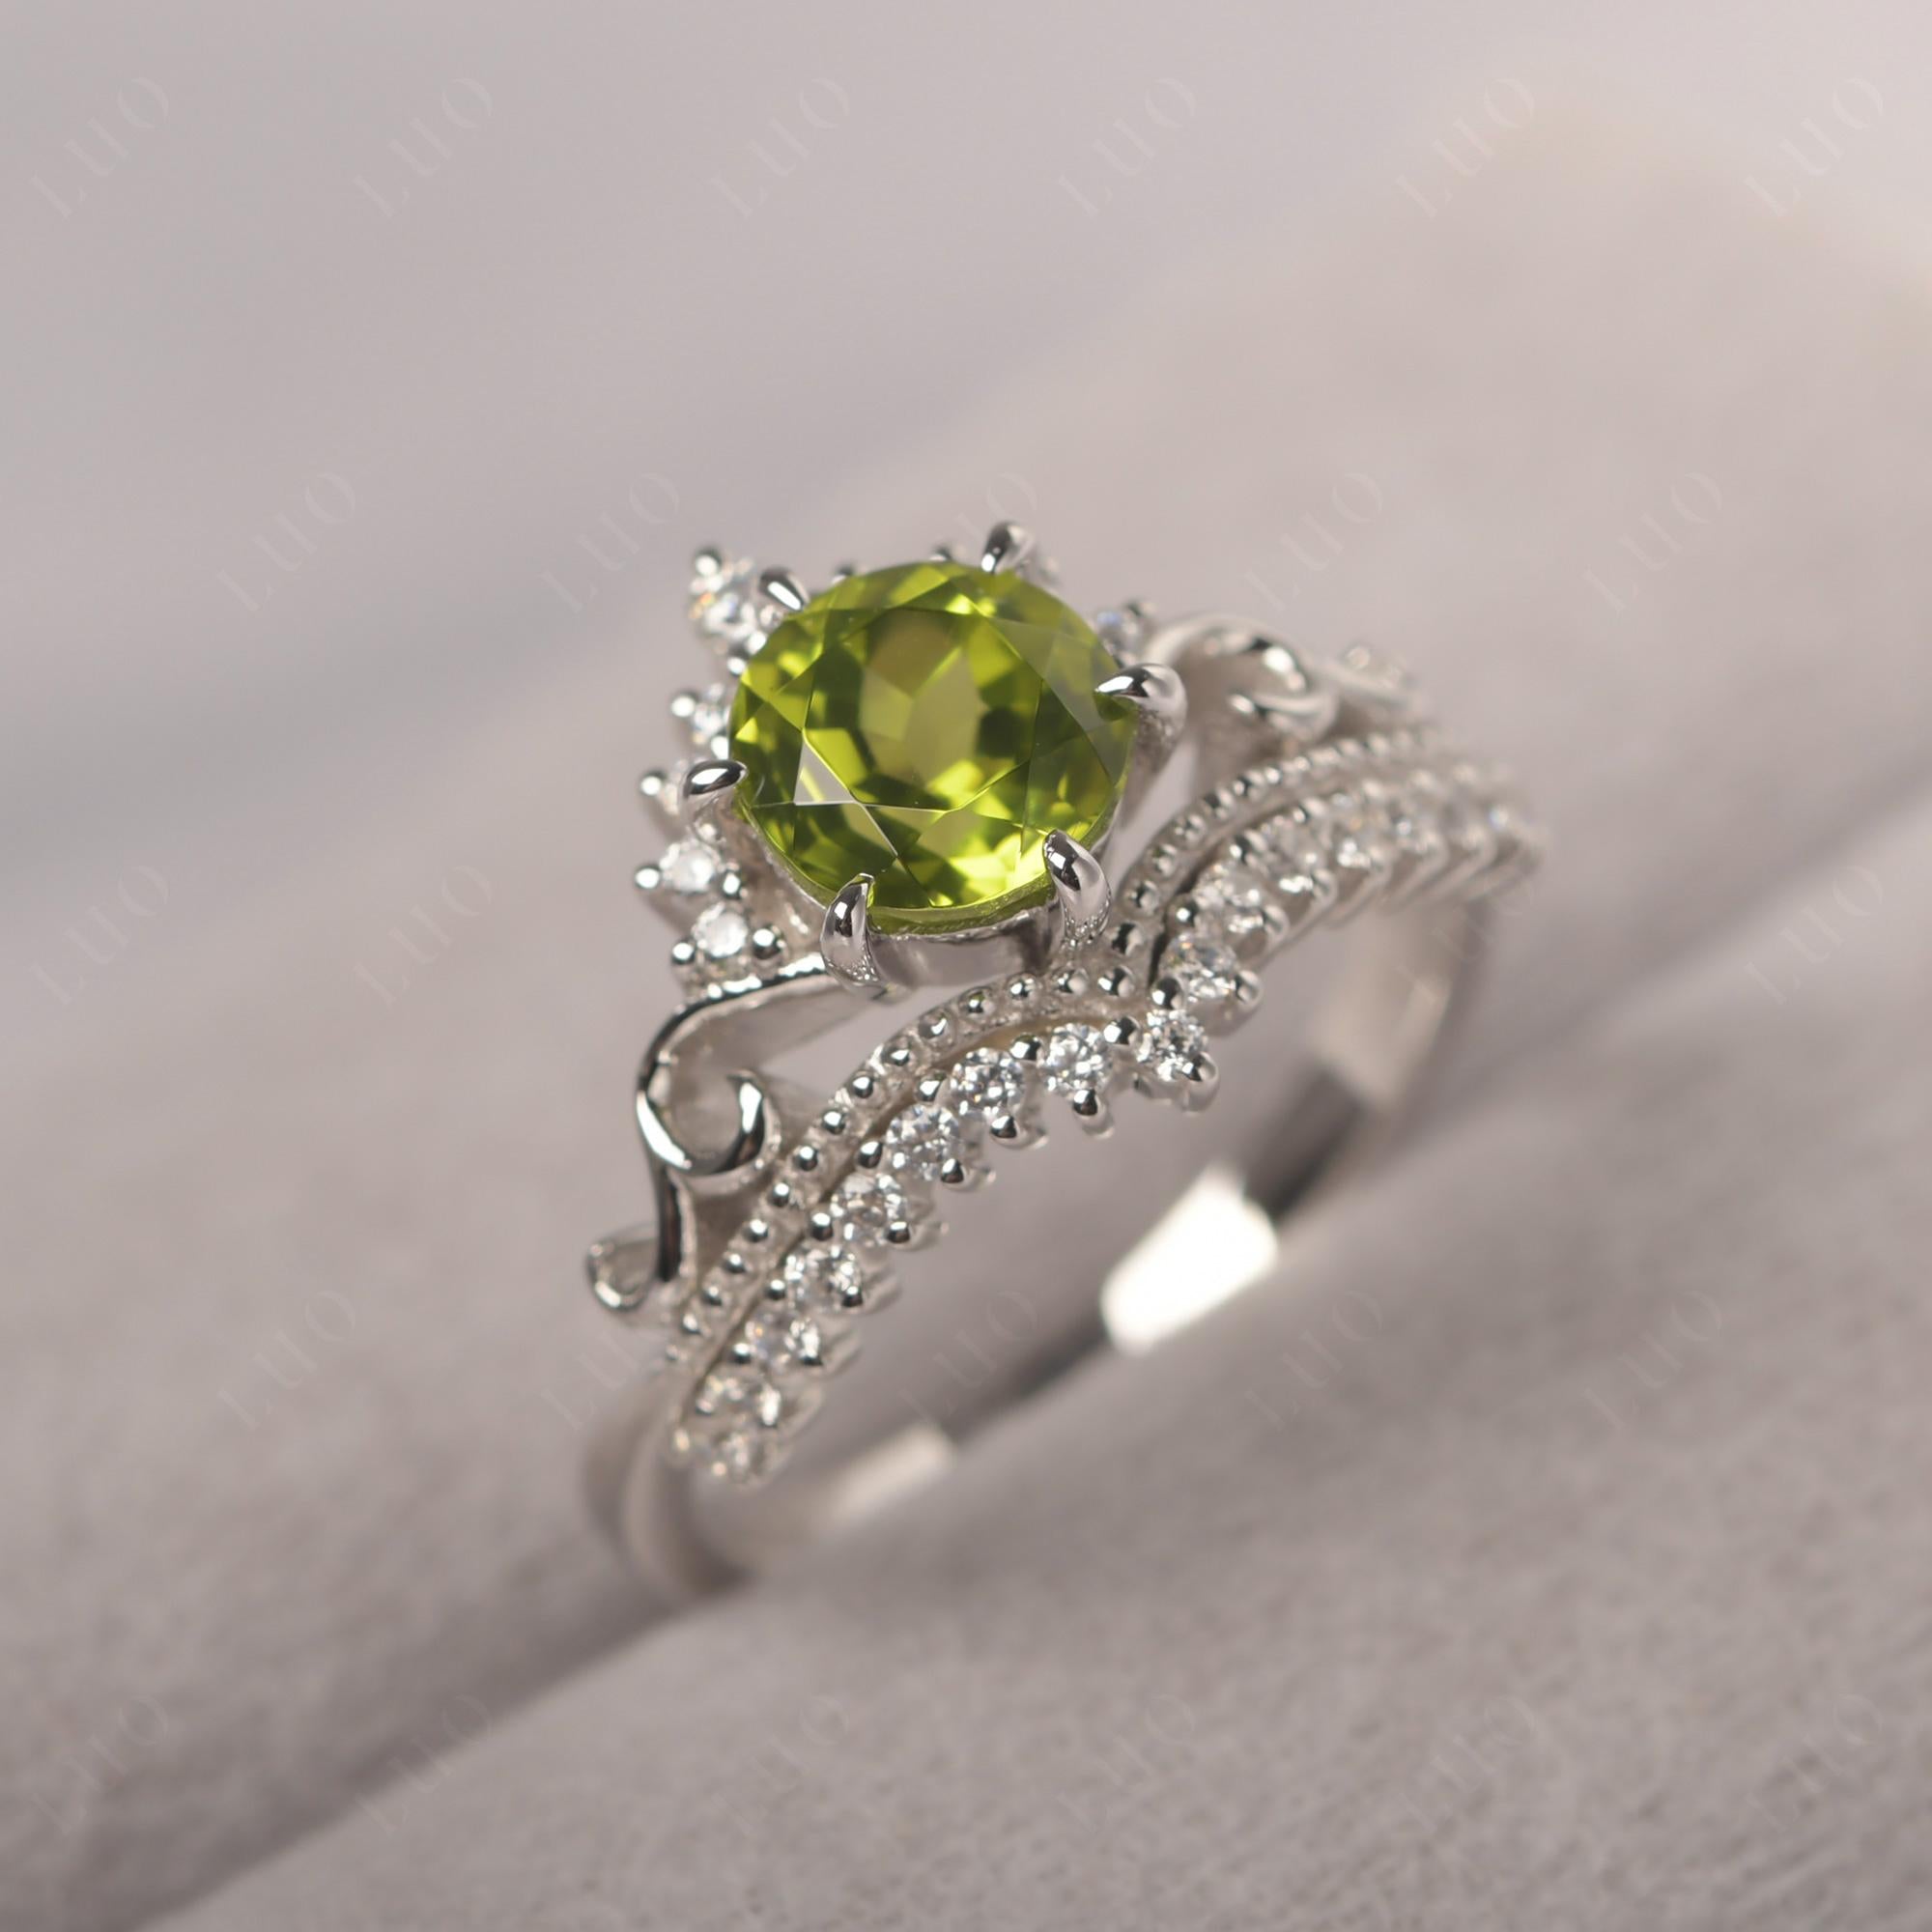 Vintage Peridot Cocktail Ring - LUO Jewelry